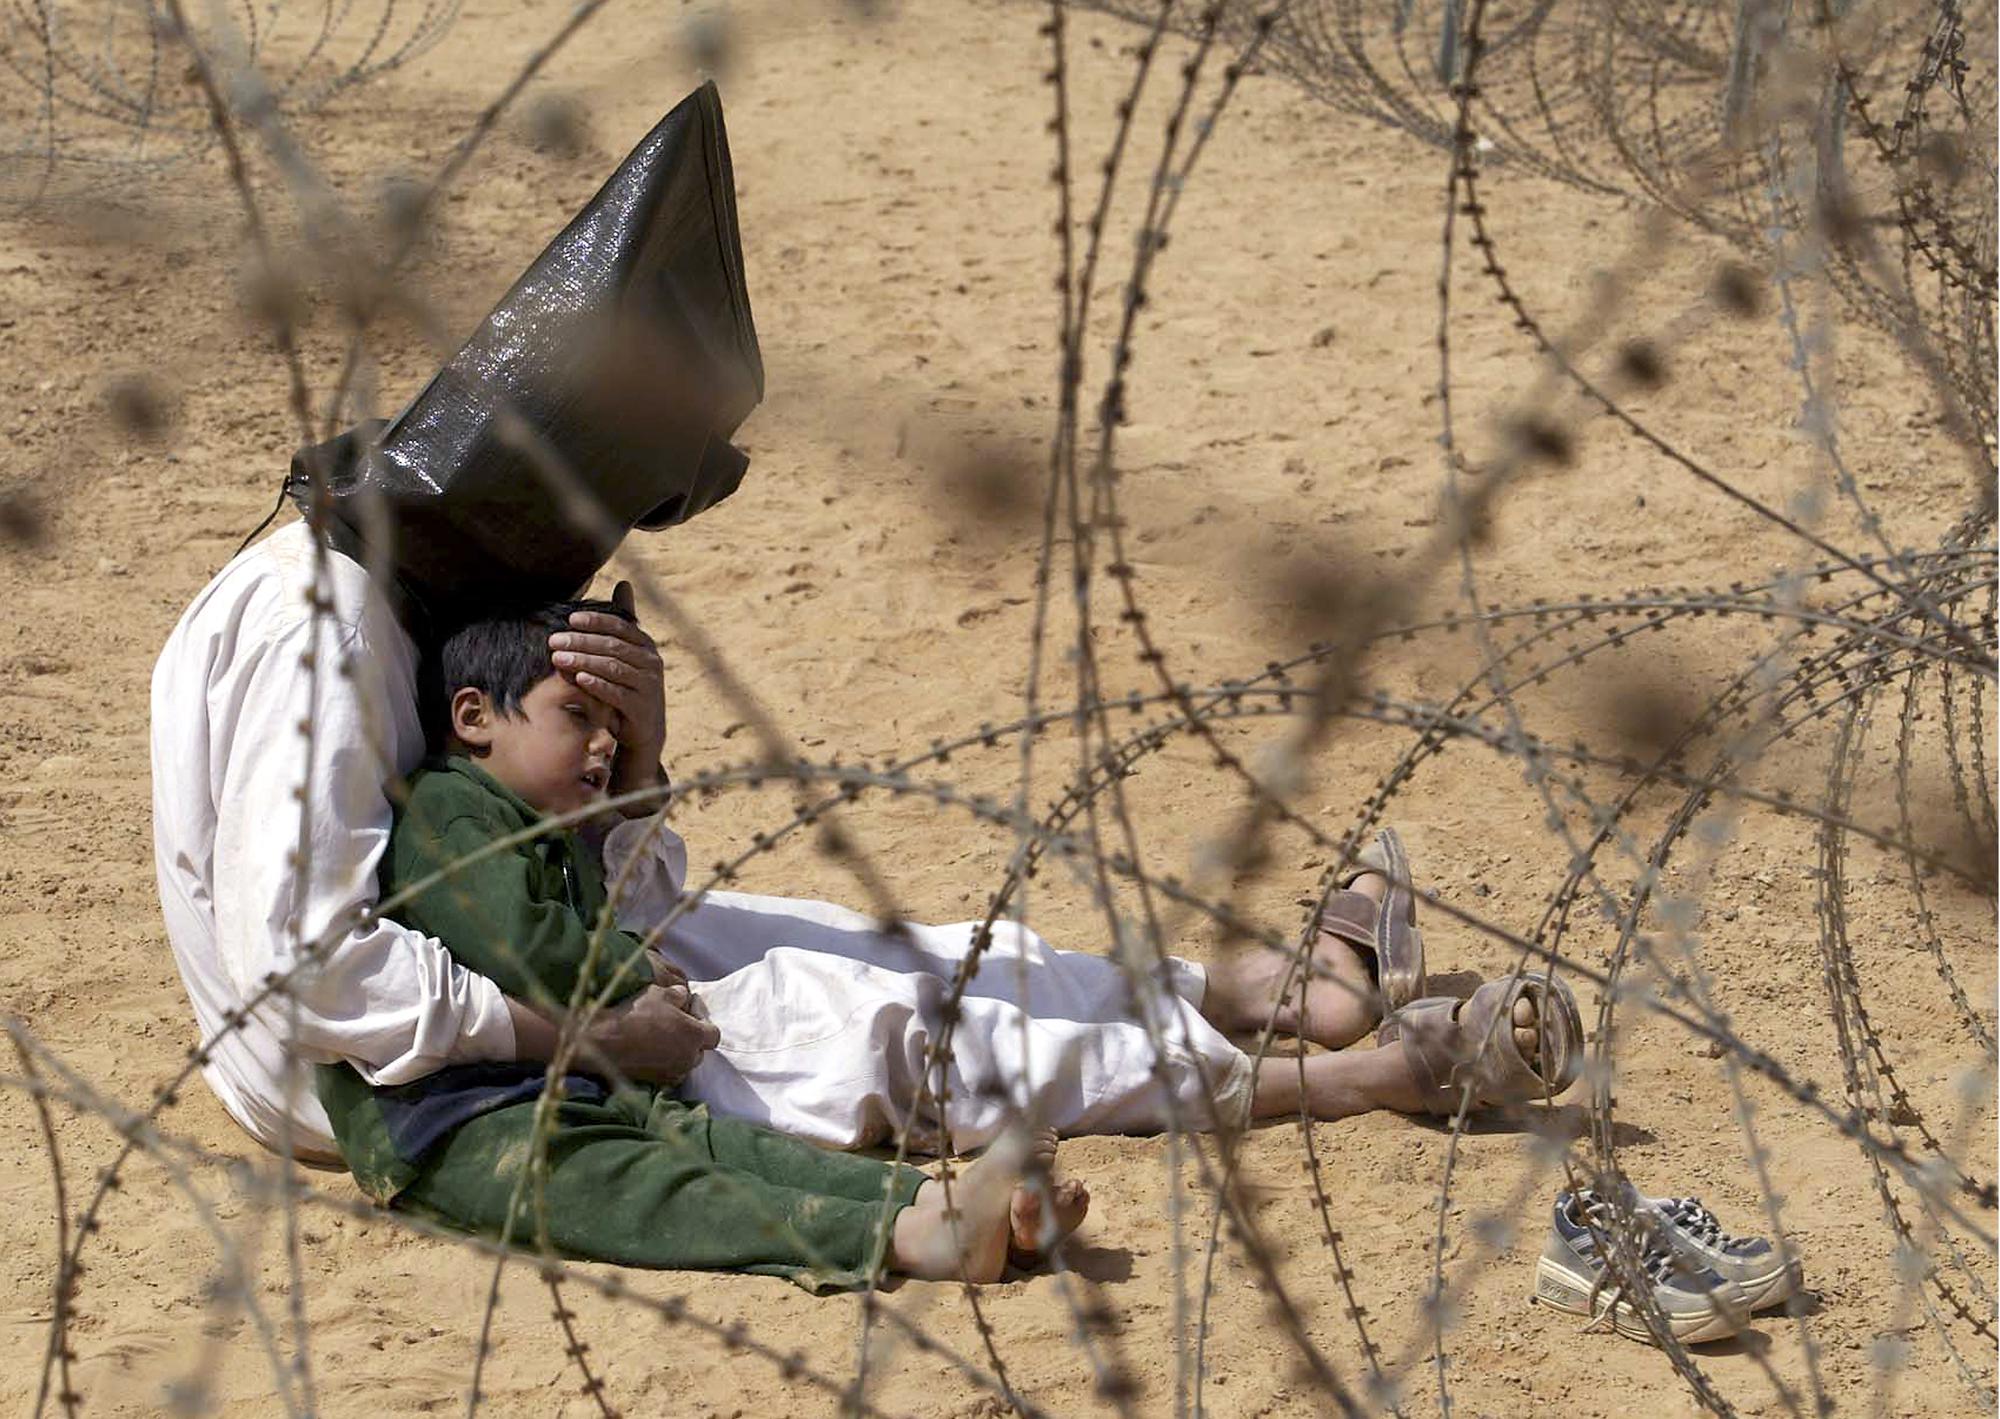 FILE - An Iraqi prisoner of war comforts his 4-year-old son at a regroupment center for POWs of the 101st Airborne Division near An Najaf, Afghanistan, March 31, 2003. The man was seized in An Najaf with his son and the U.S. military did not want to separate father and son. (AP Photo/Jean-Marc Bouju, File)